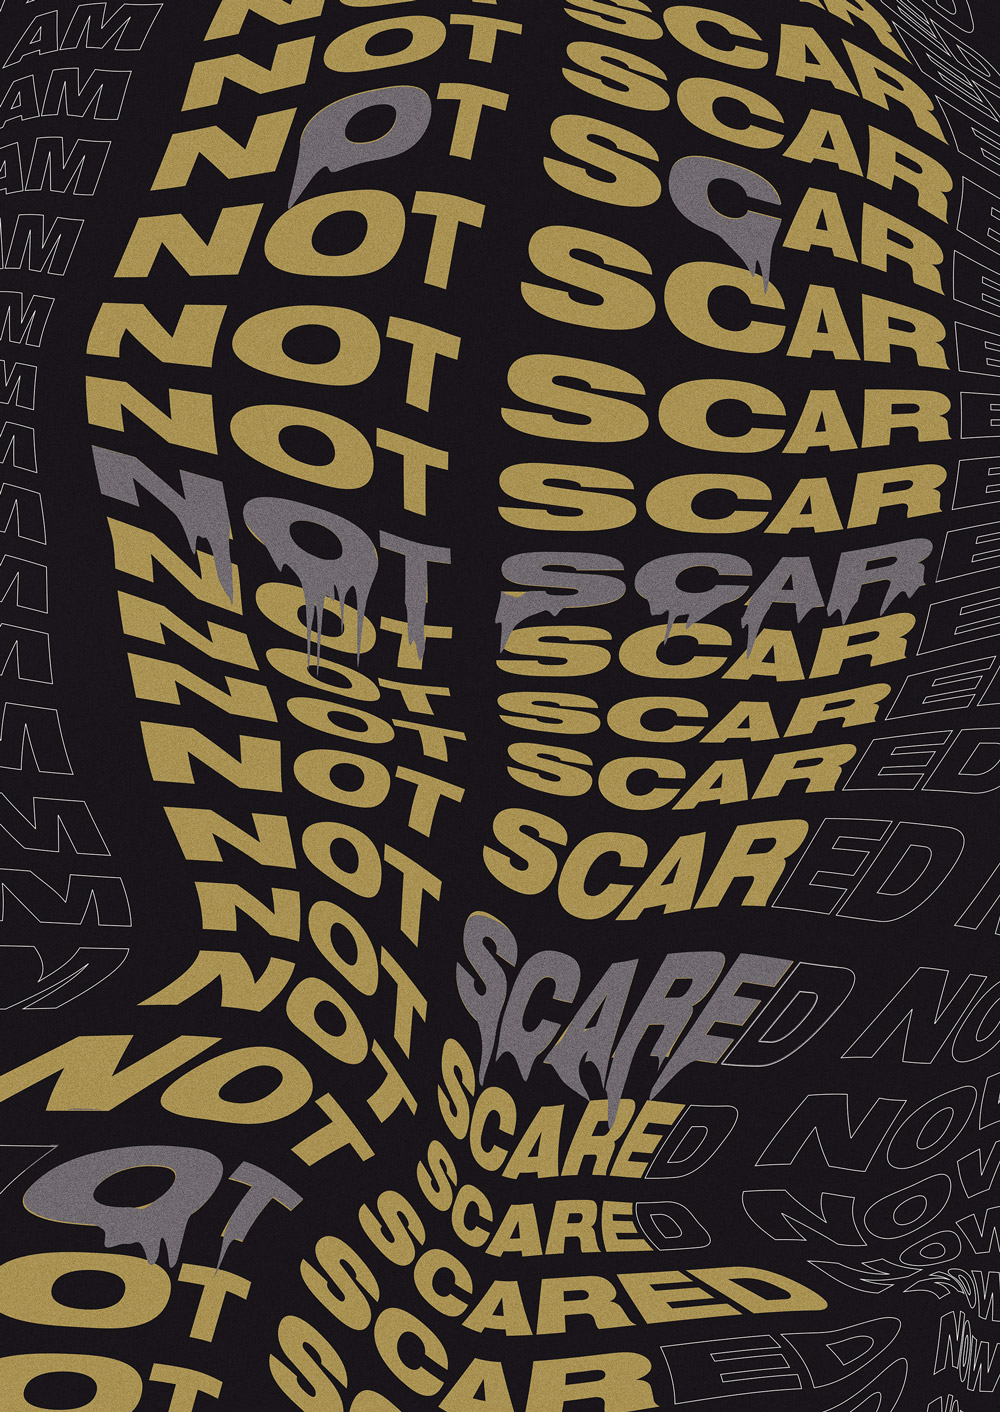 Not Scared Poster. I'm Not Scared now.